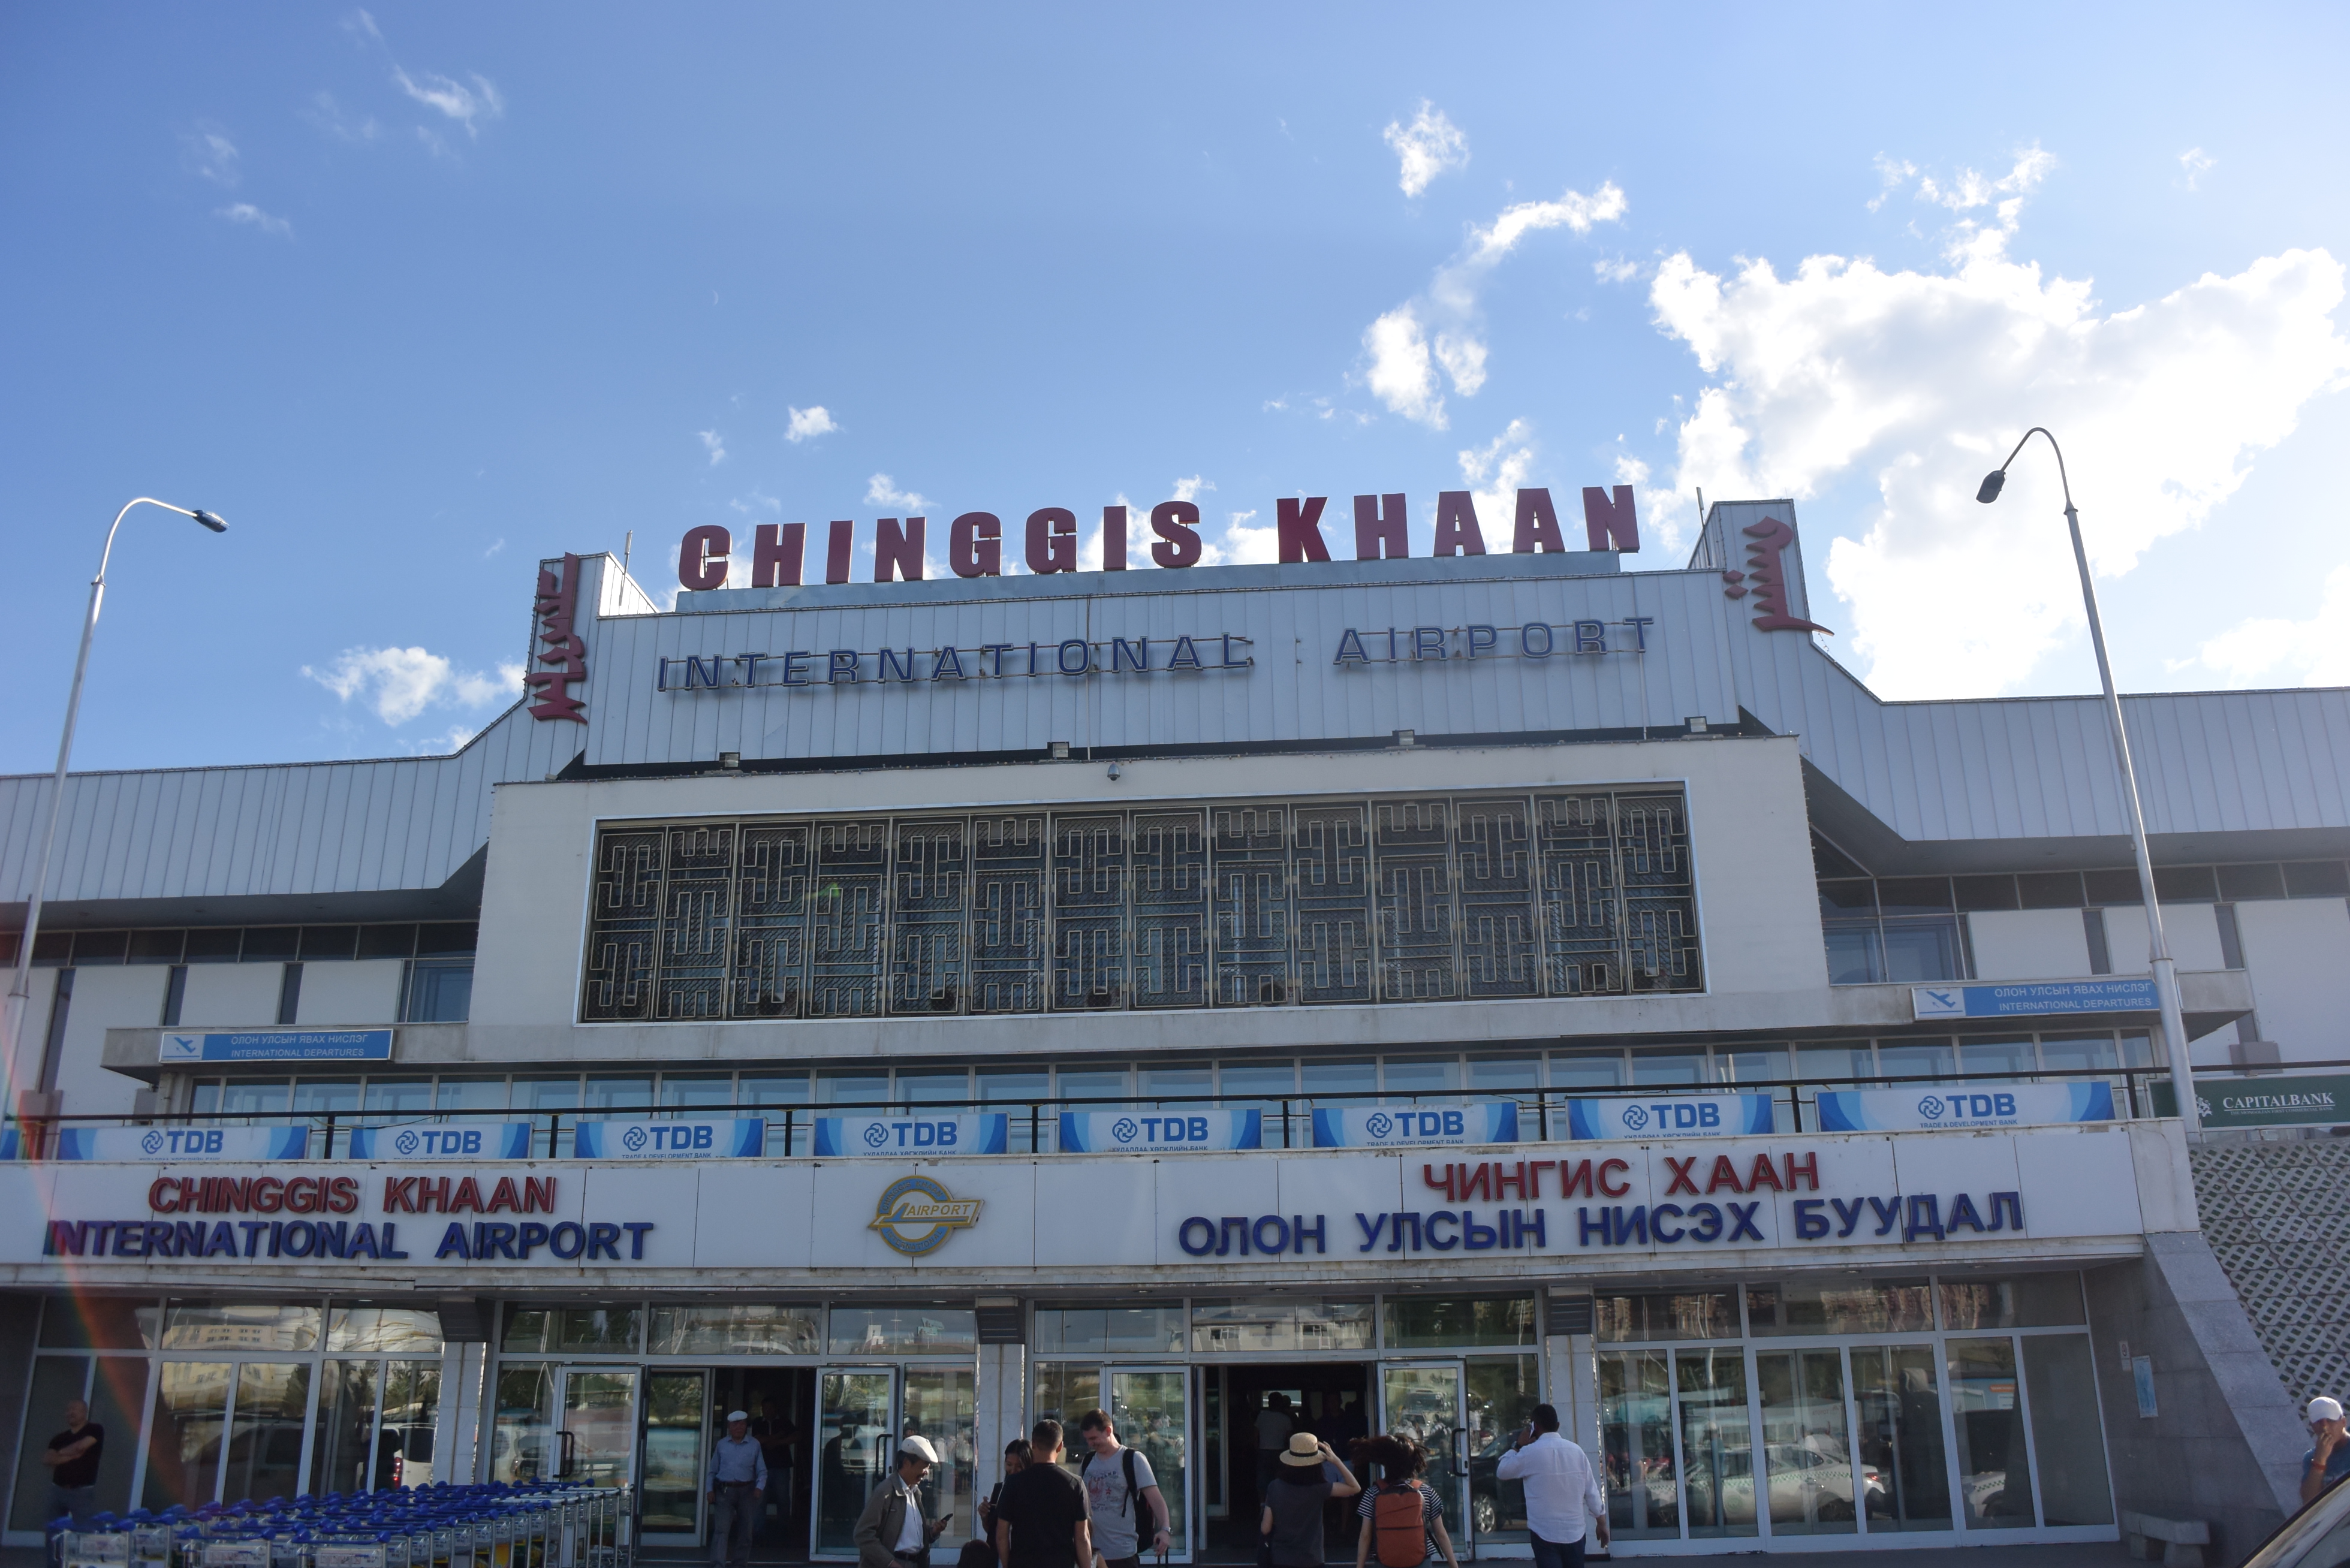 Chinggis Khaan Airport Welcomes You 